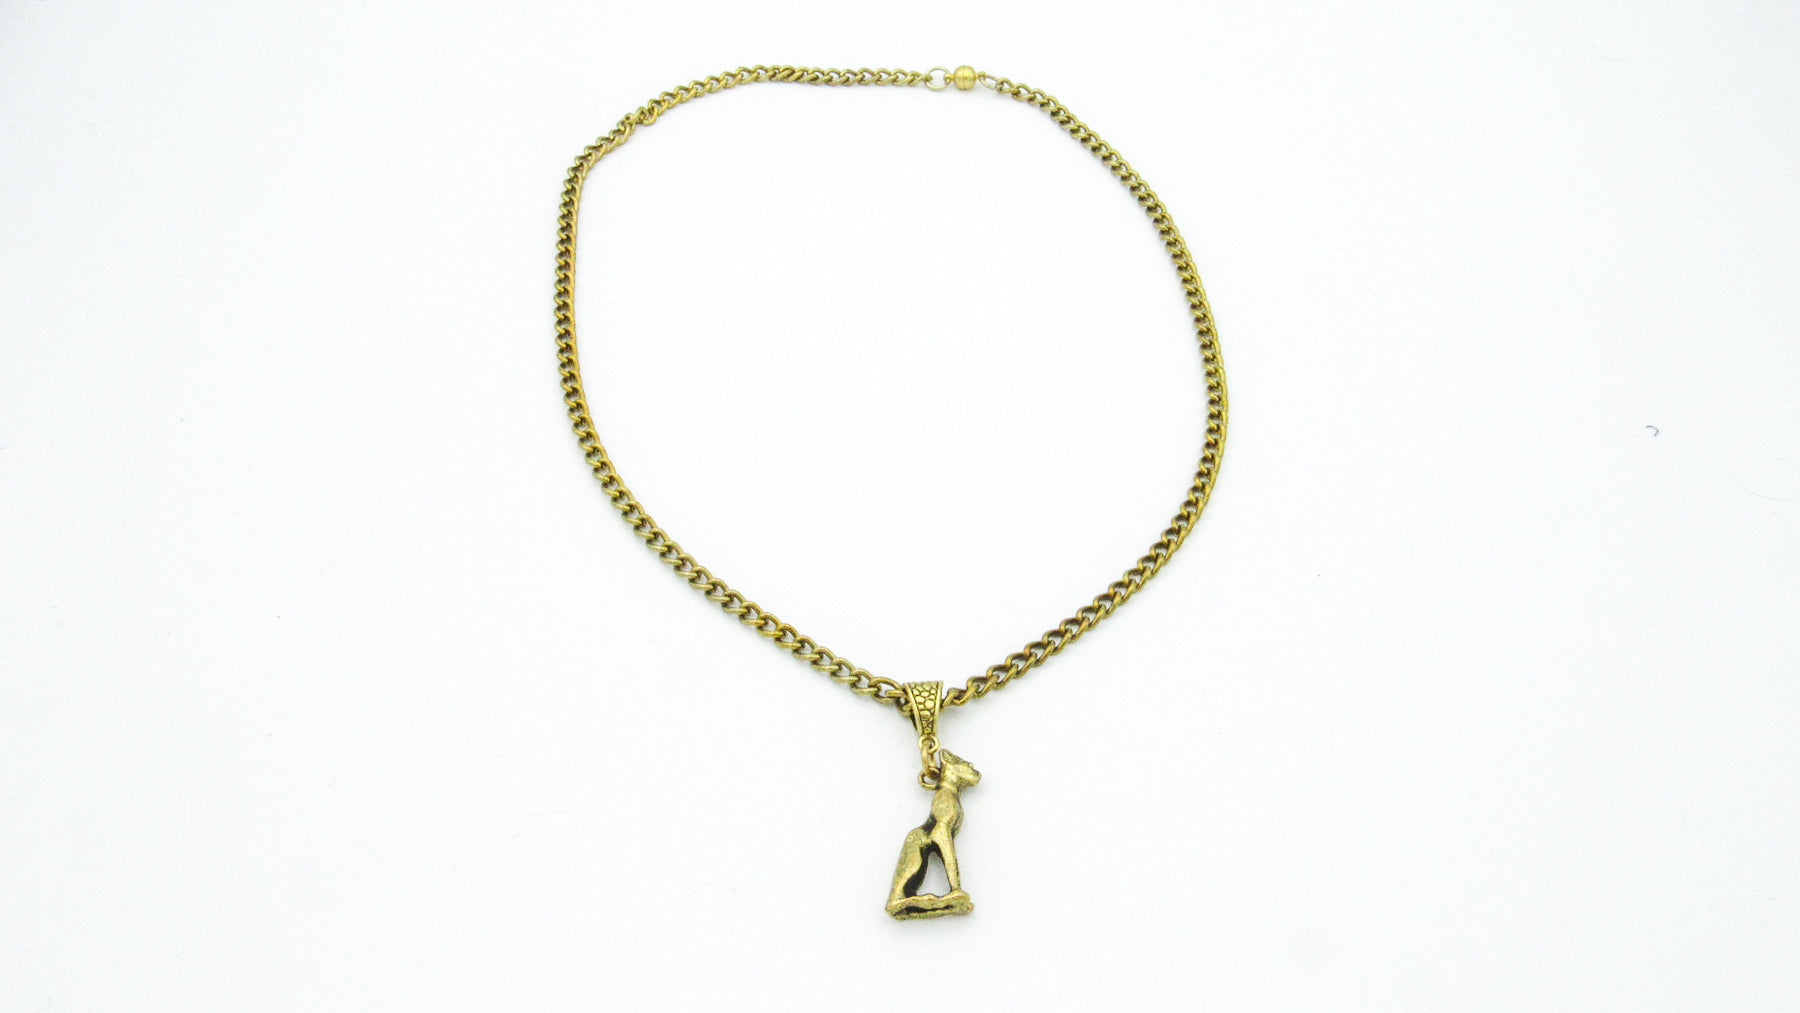 Sphinx Cat Necklace With Heavy Gold Chain •  Necklaces • Oh, Heart!